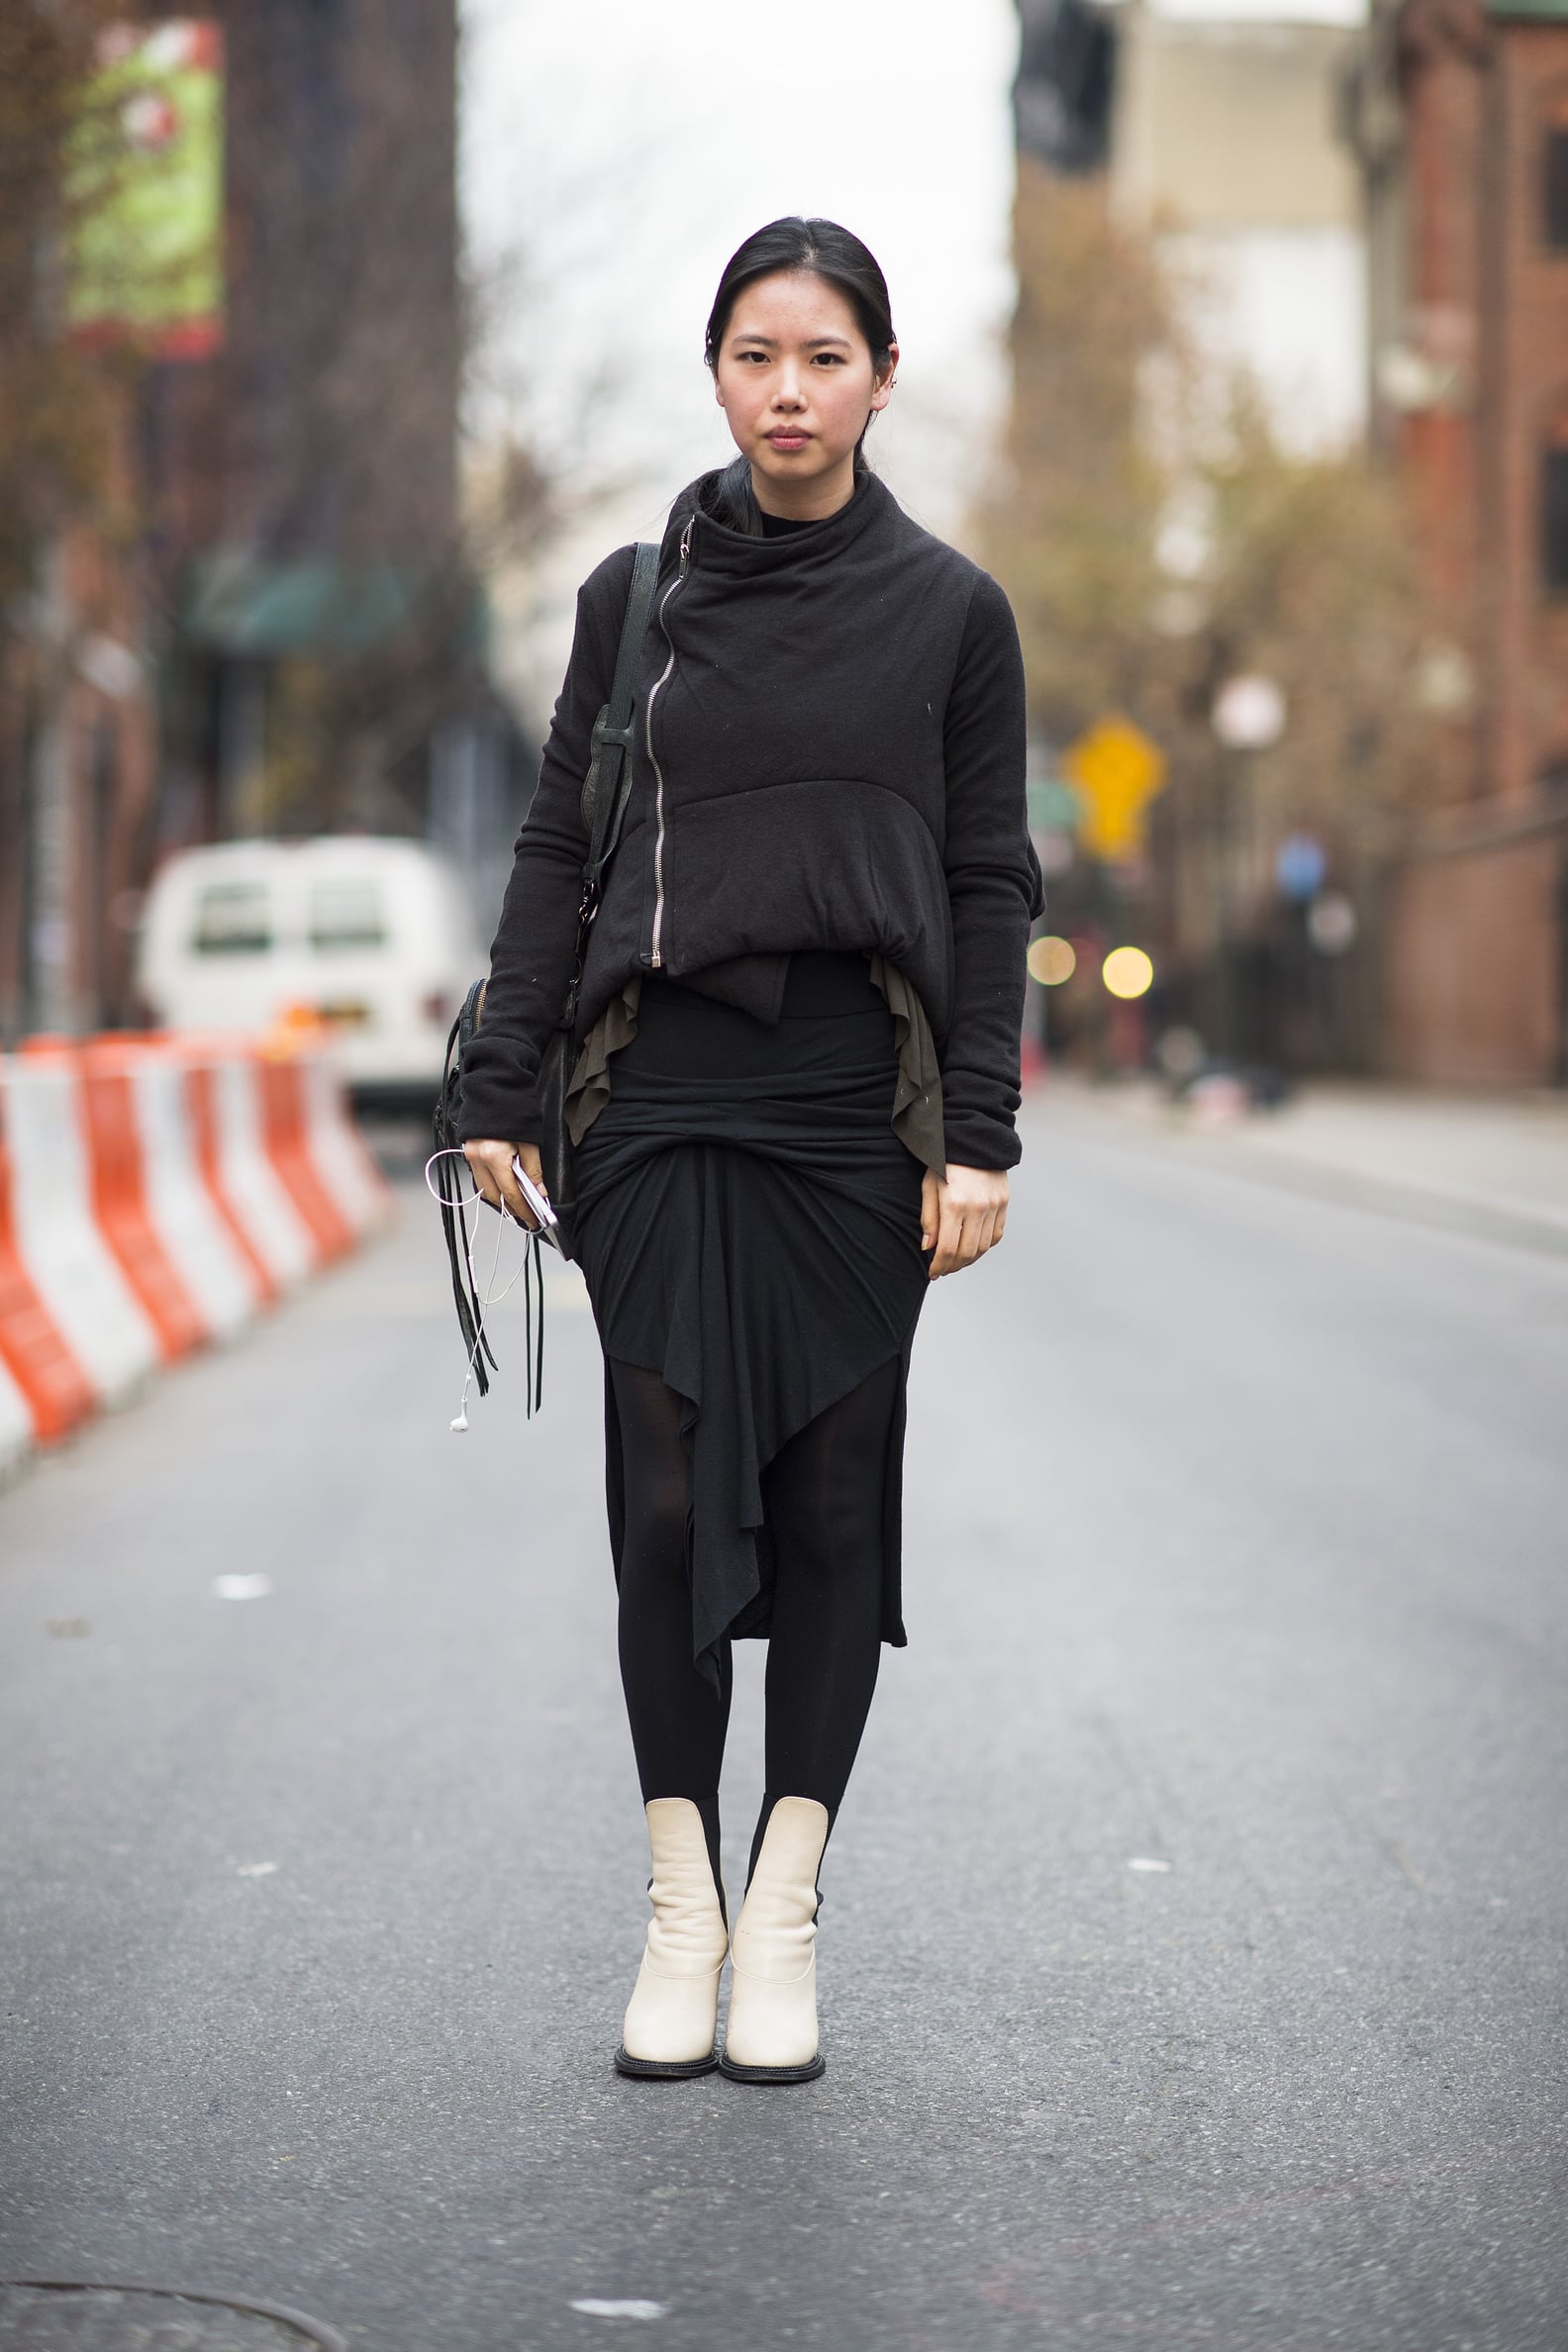 70+ Winter Street Style Looks to Inspire Your Outfits | POPSUGAR Fashion